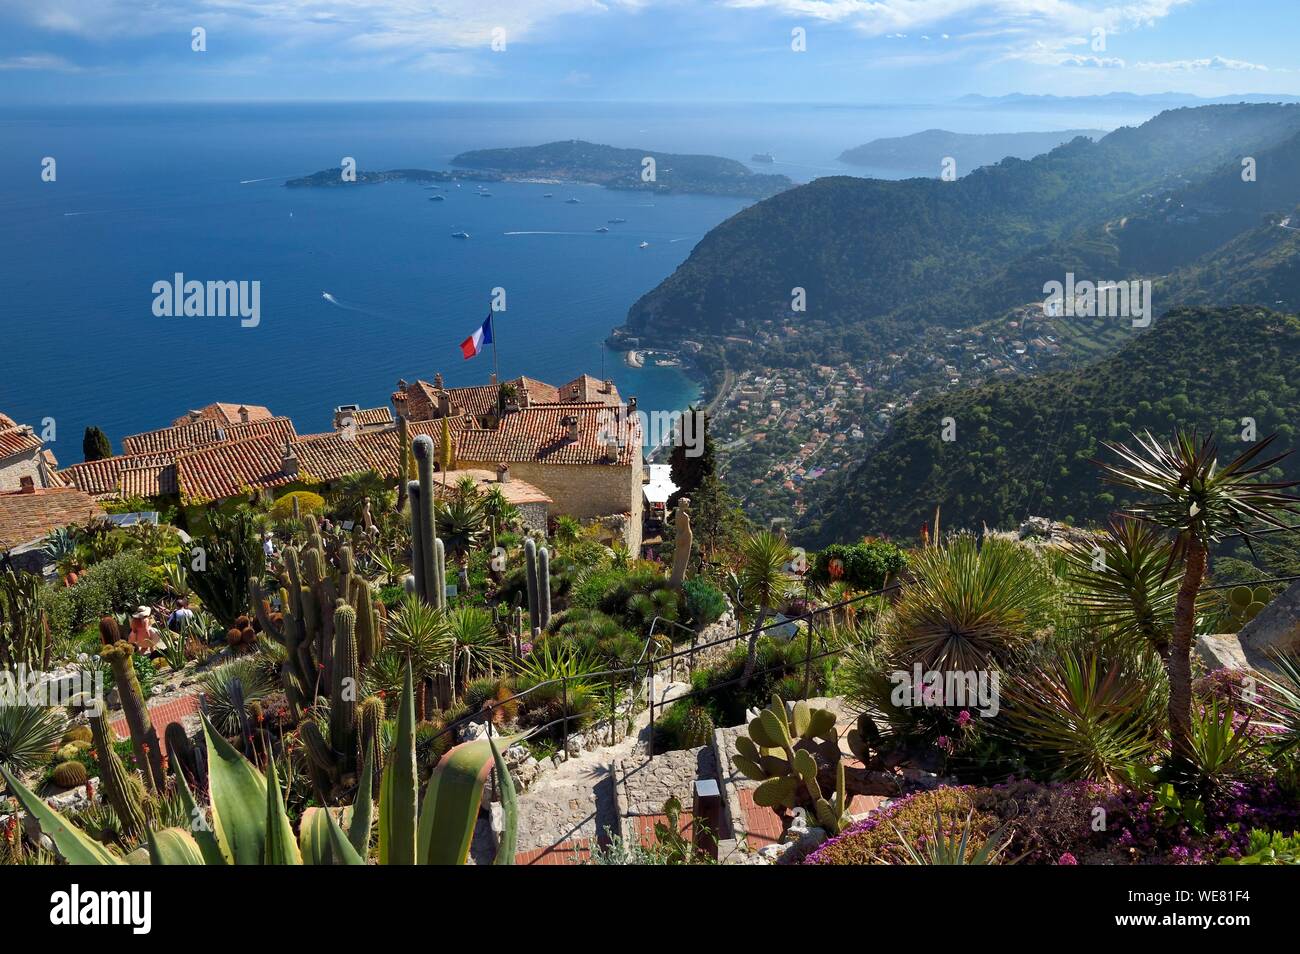 France, Alpes Maritimes, the hilltop village of Eze and its Exotic Garden, Saint Jean Cap Ferrat in the background Stock Photo